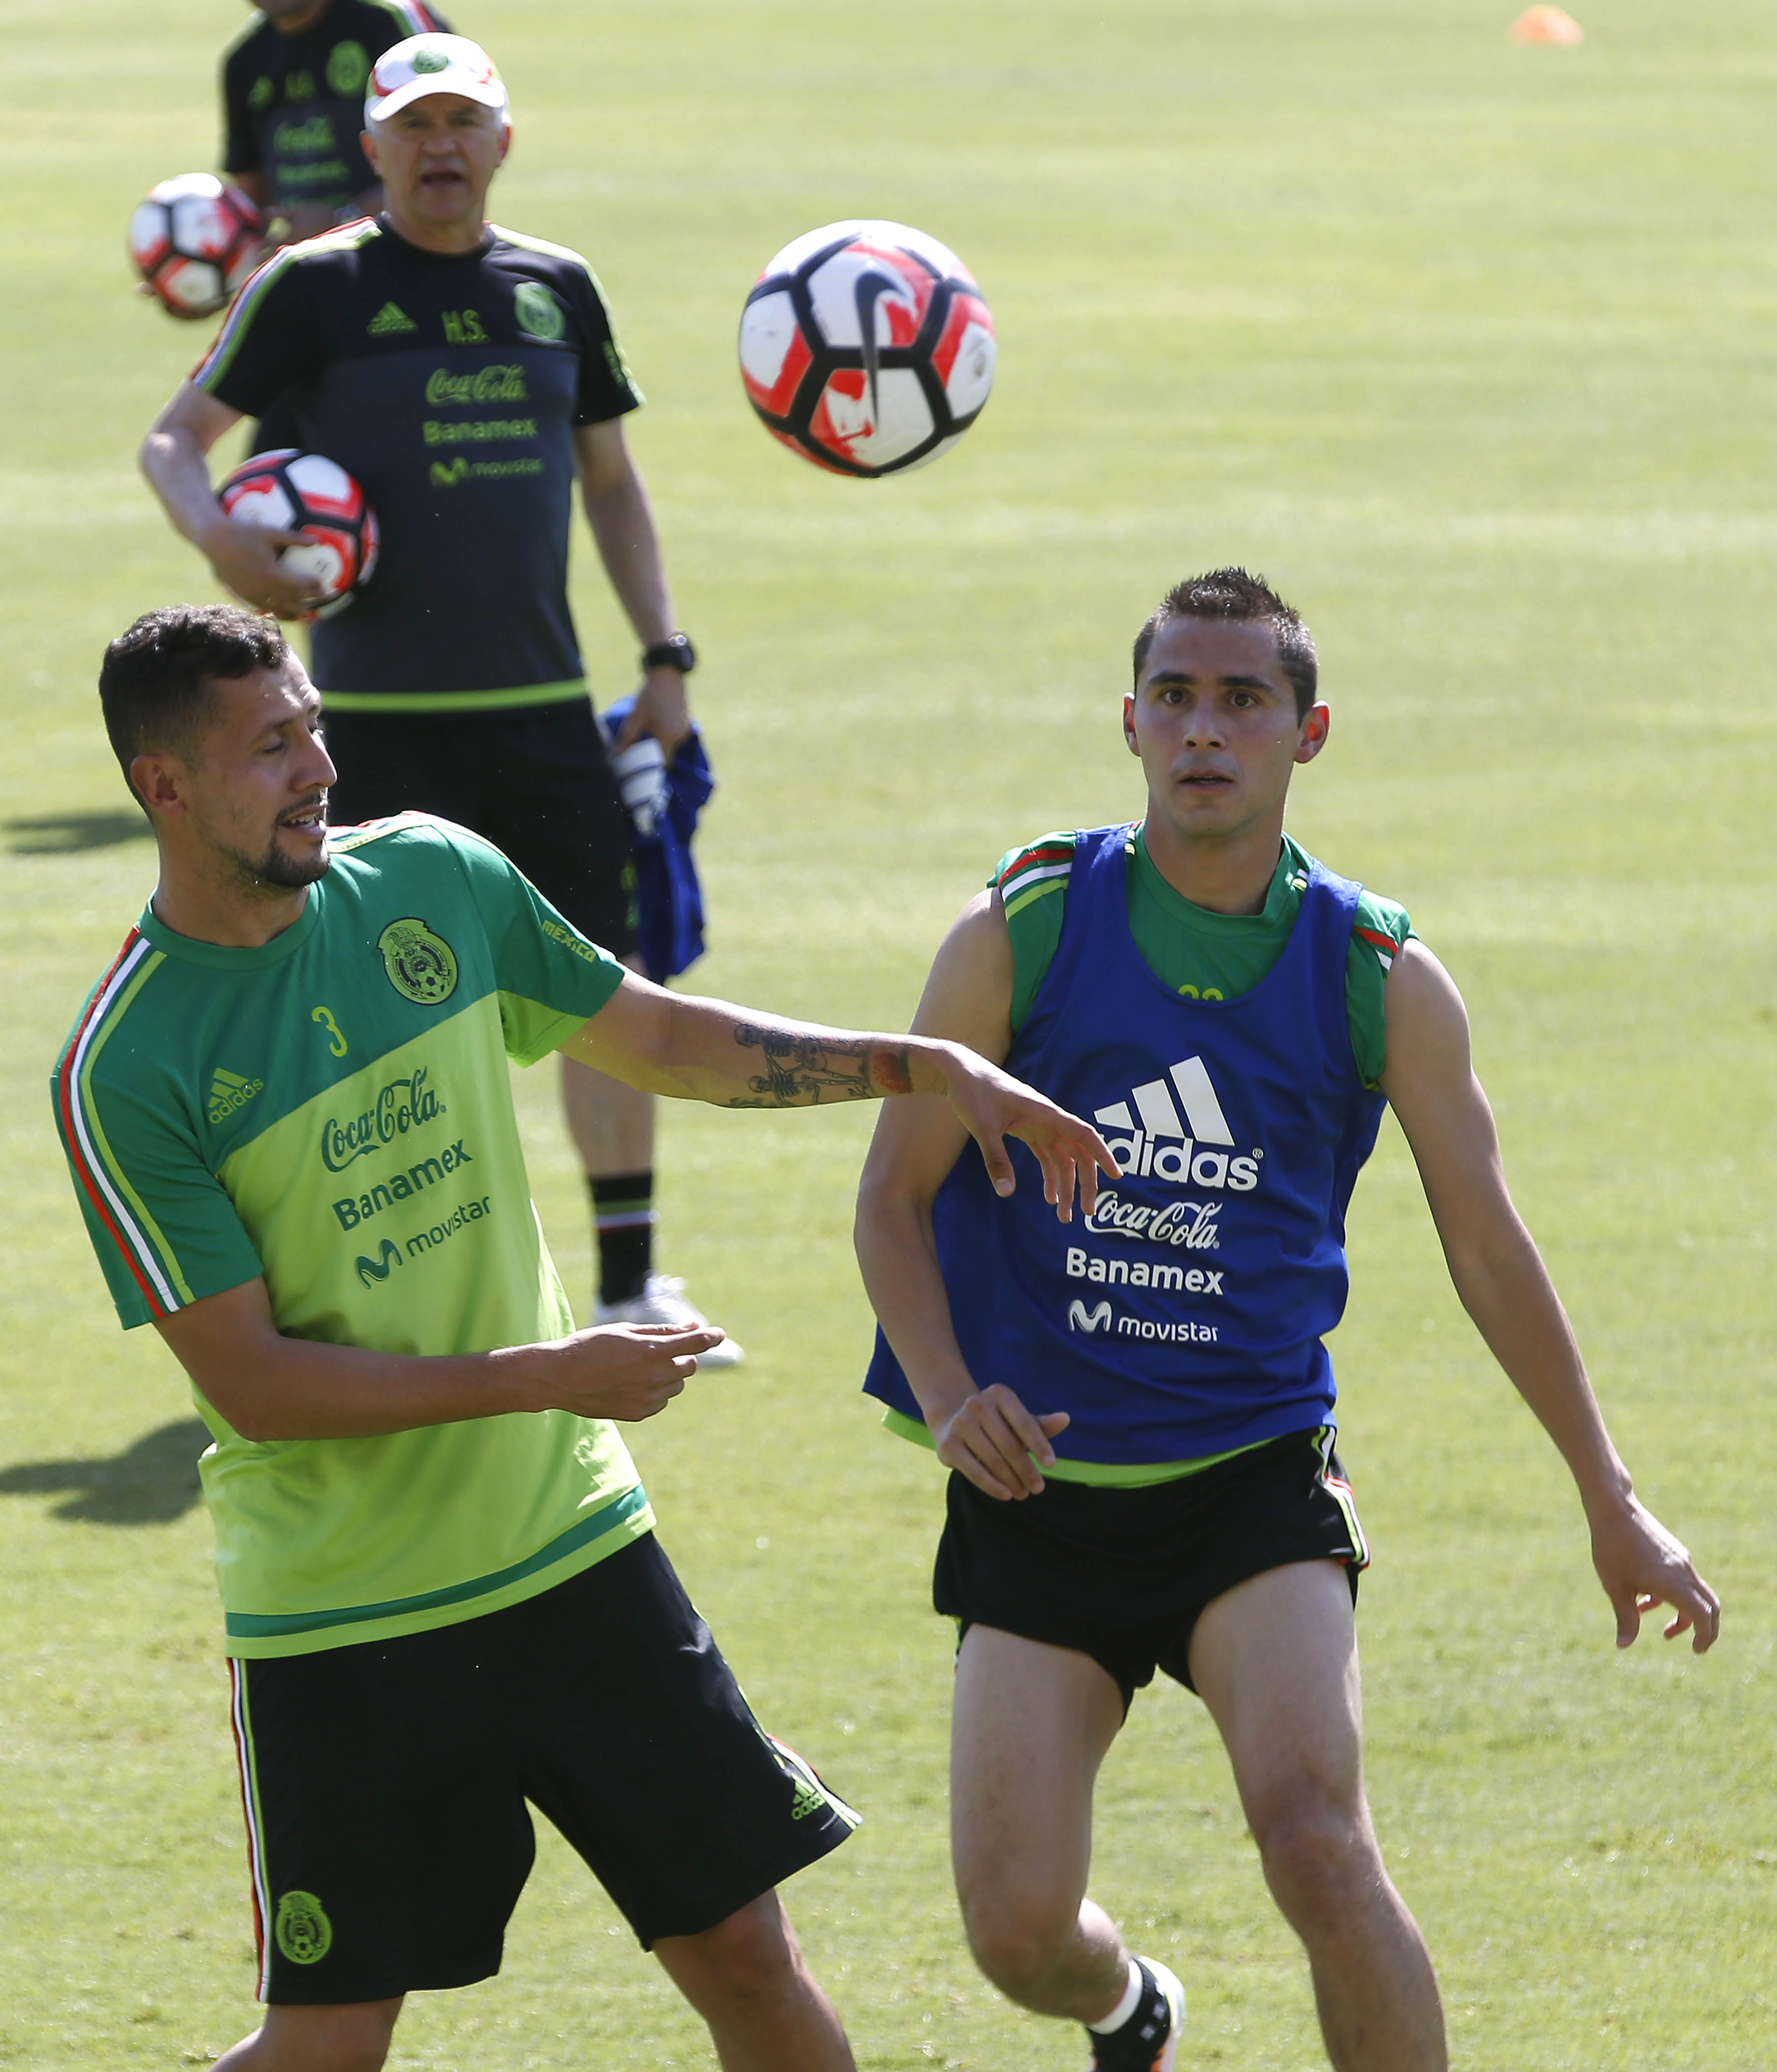 Mexico national soccer team practices at GCU - GCU Today